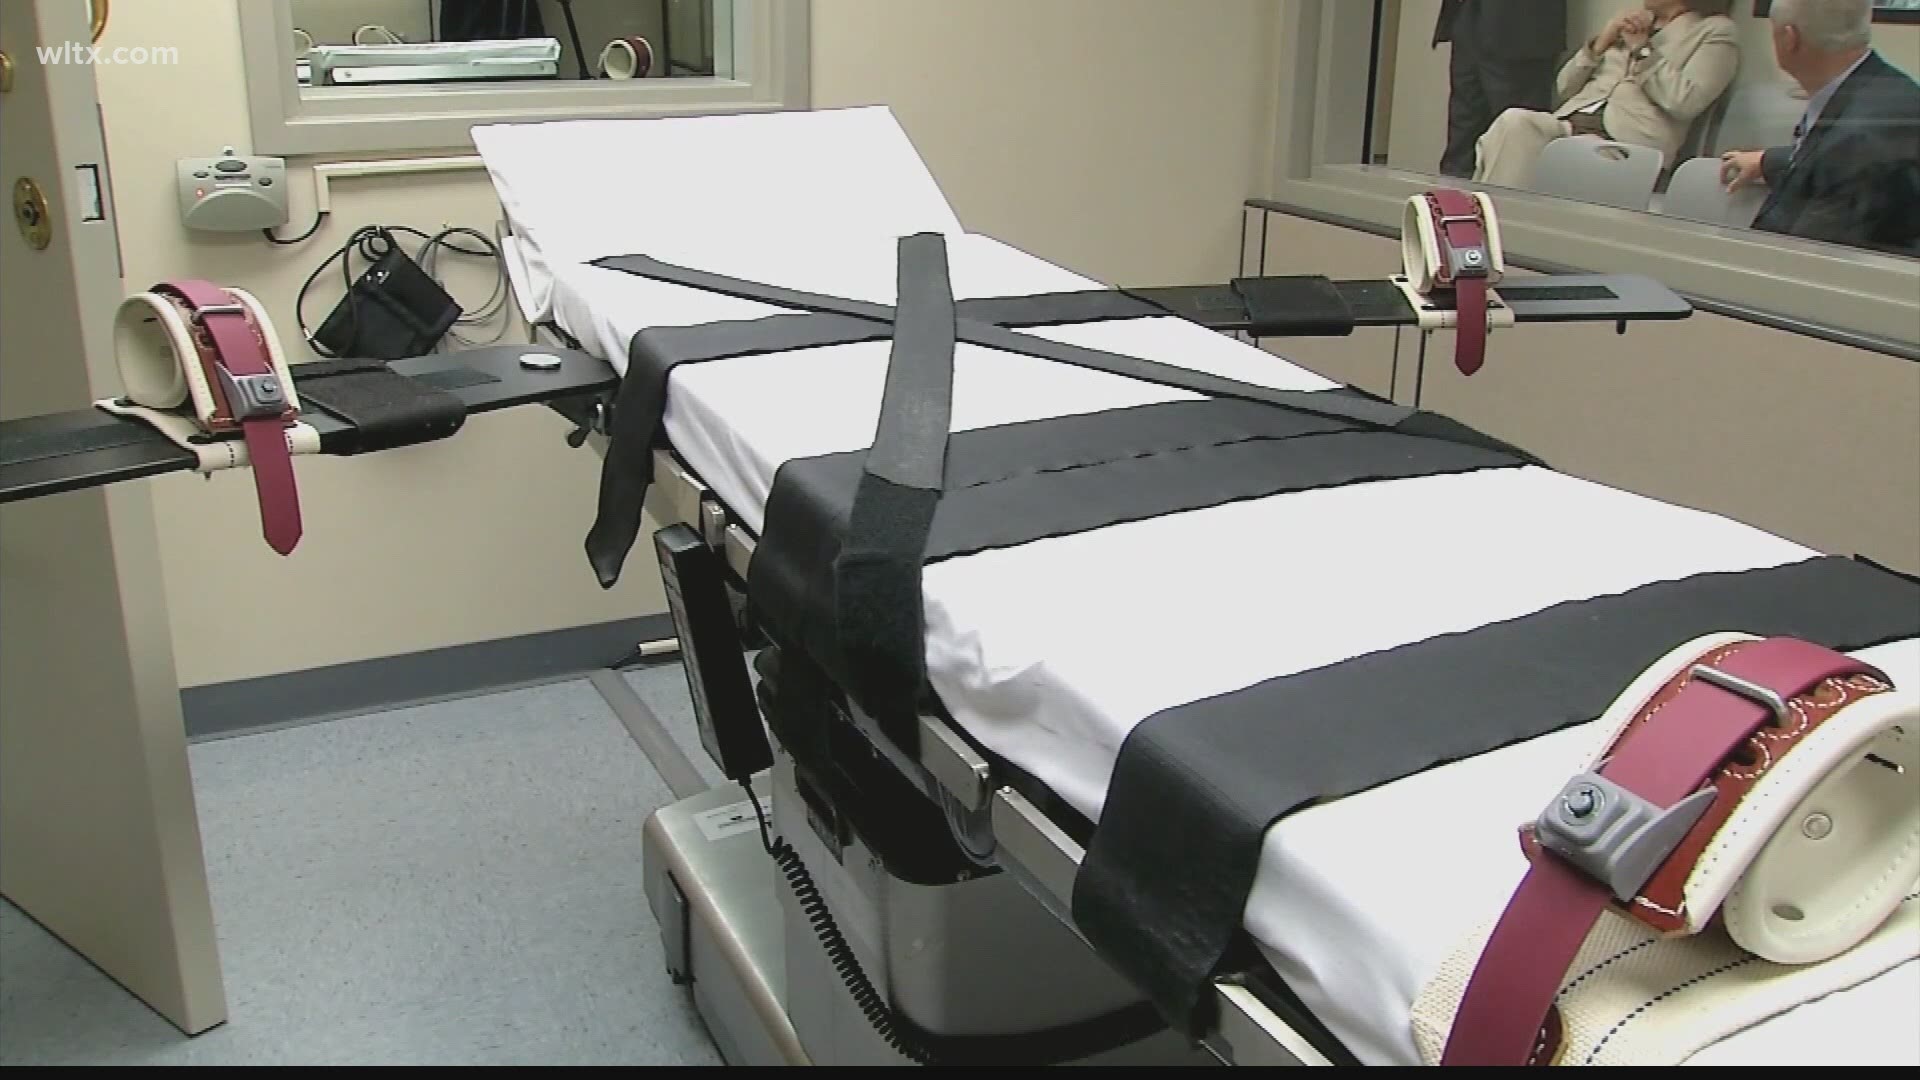 The bill is designed to allow executions to restart in South Carolina.